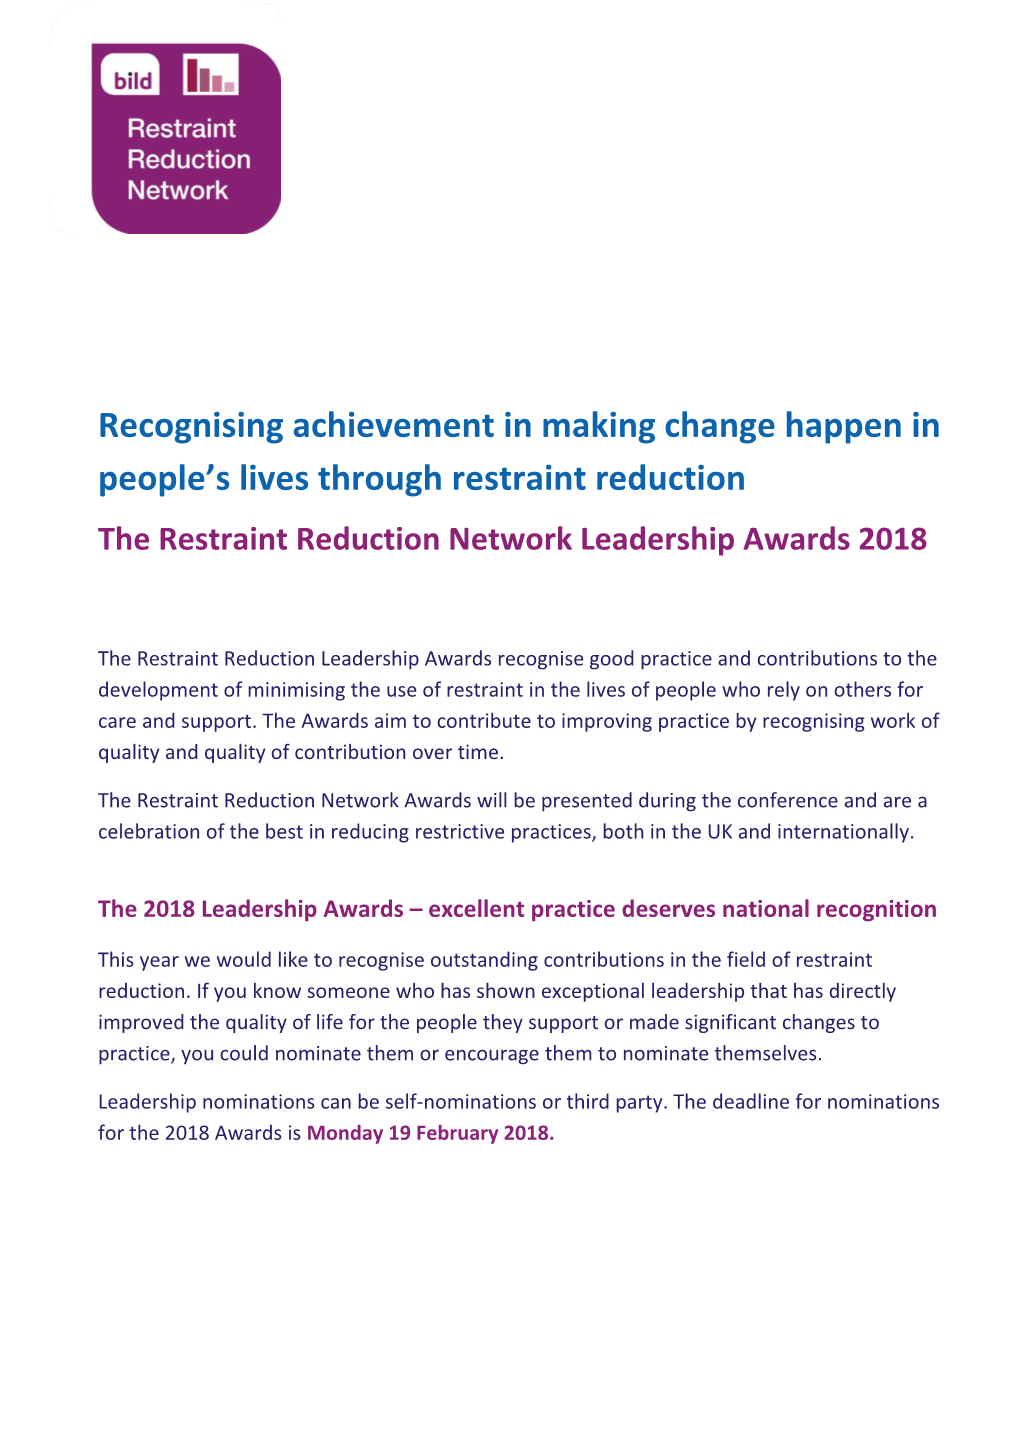 Recognising Achievement in Making Change Happen in People S Lives Through Restraint Reduction